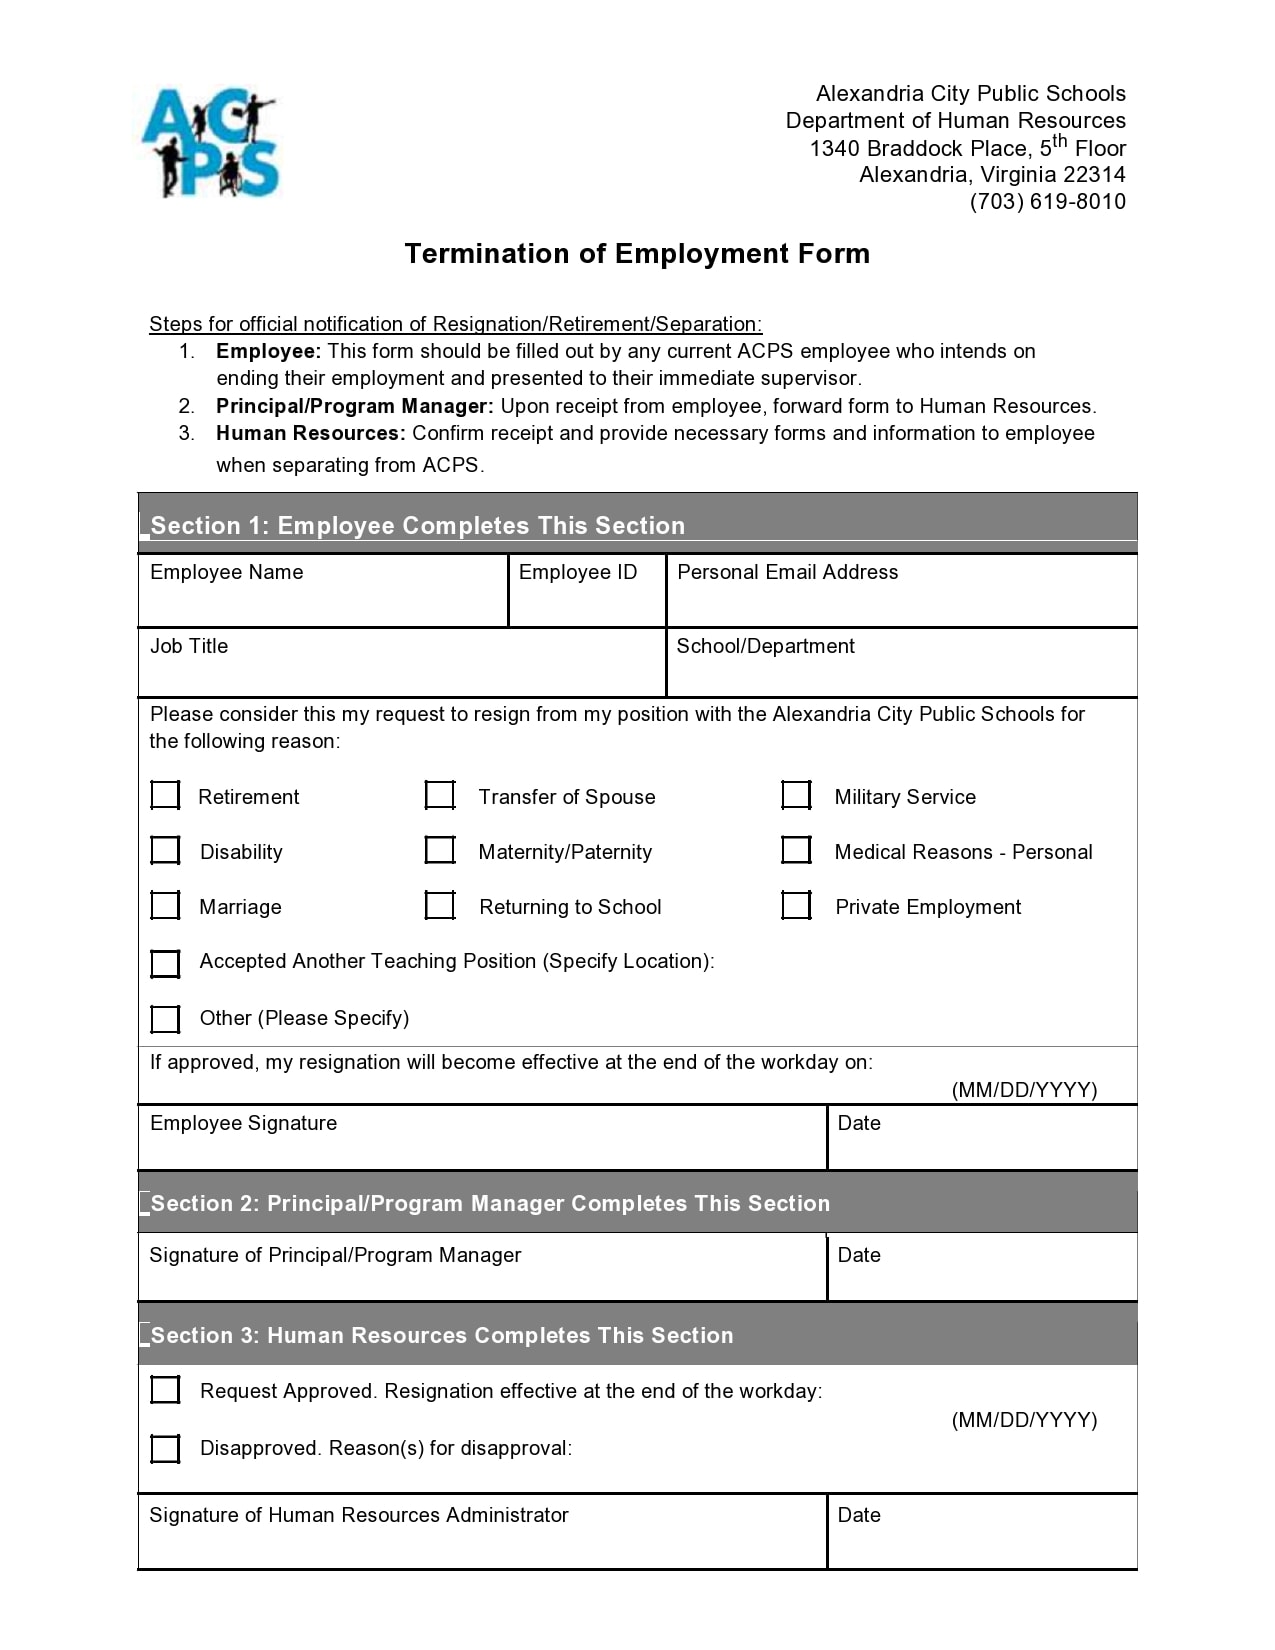 30-best-employee-termination-forms-letter-templates